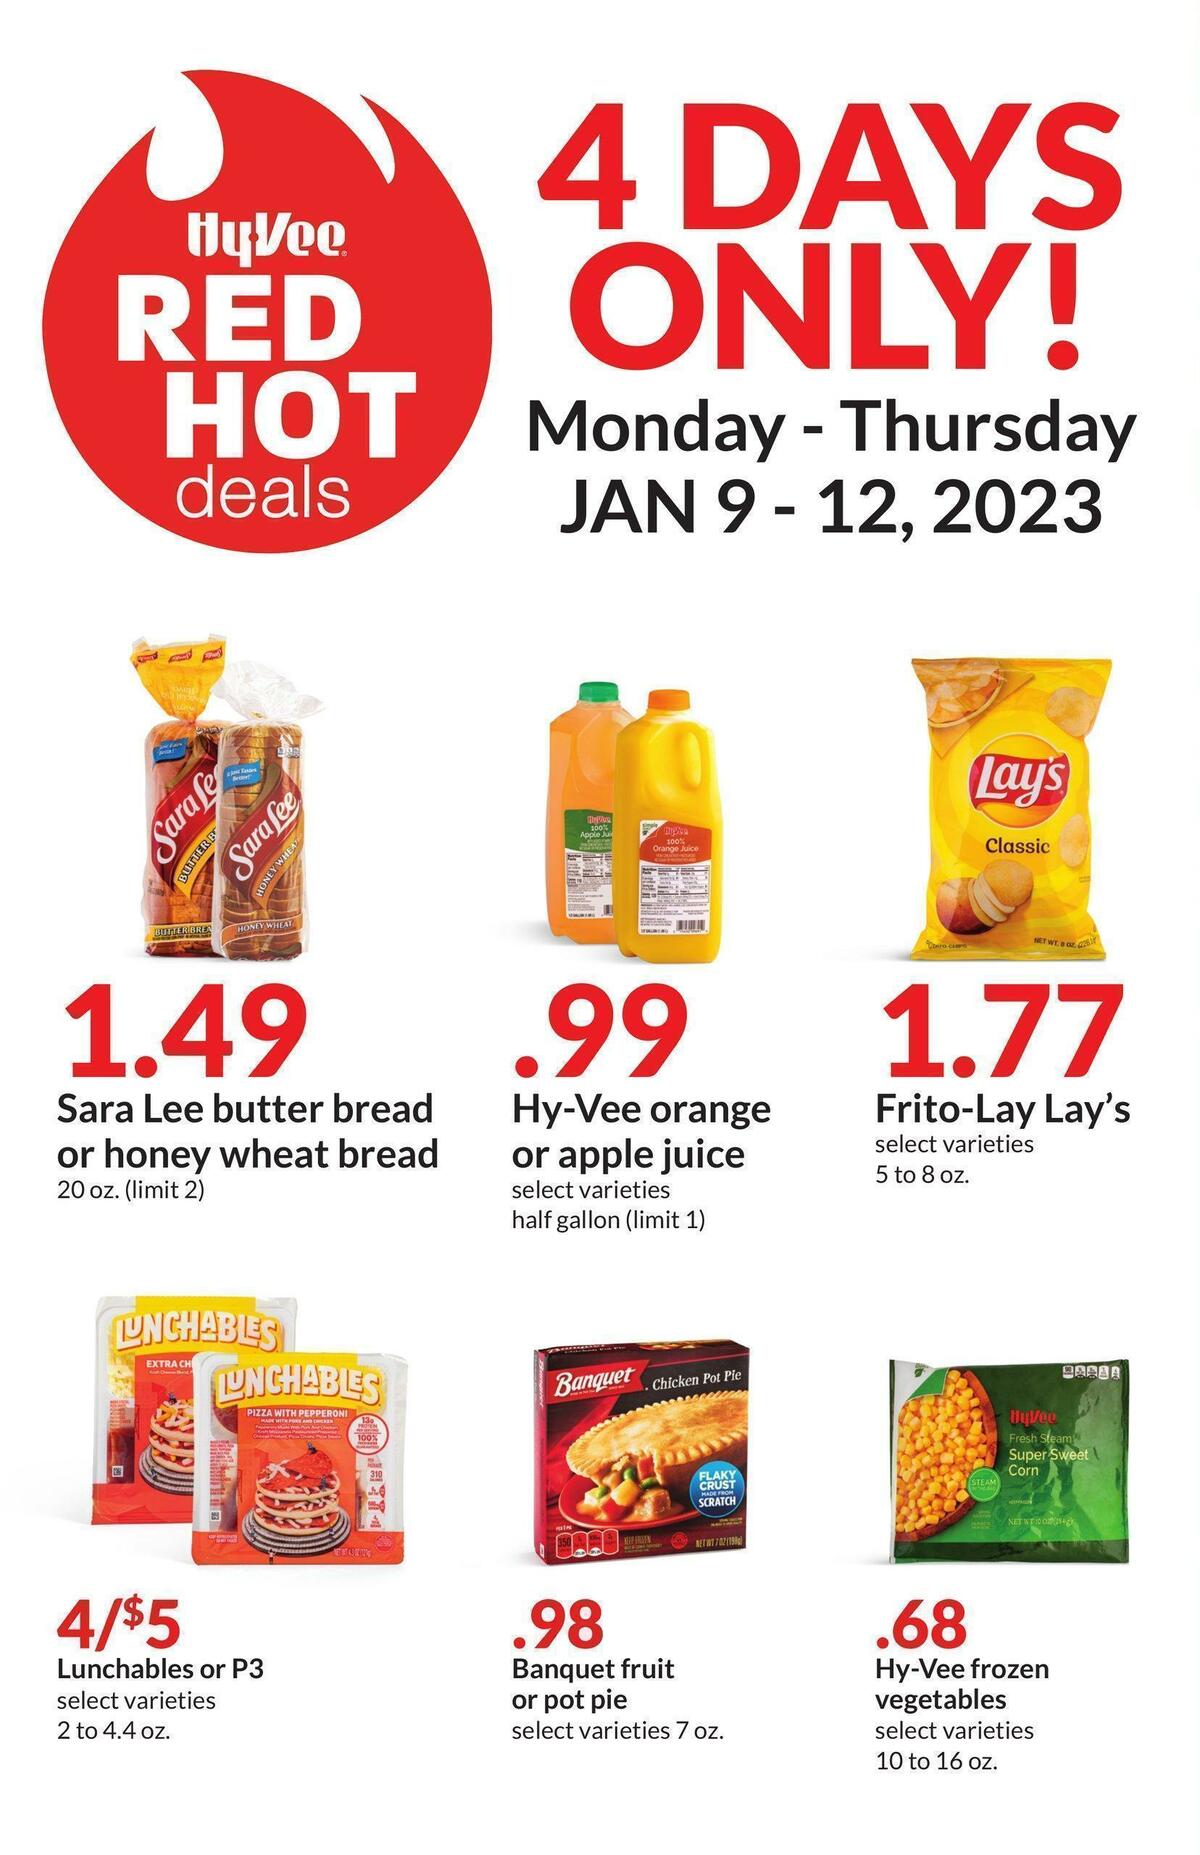 Hy-Vee 4 Days Only! Weekly Ad from January 9